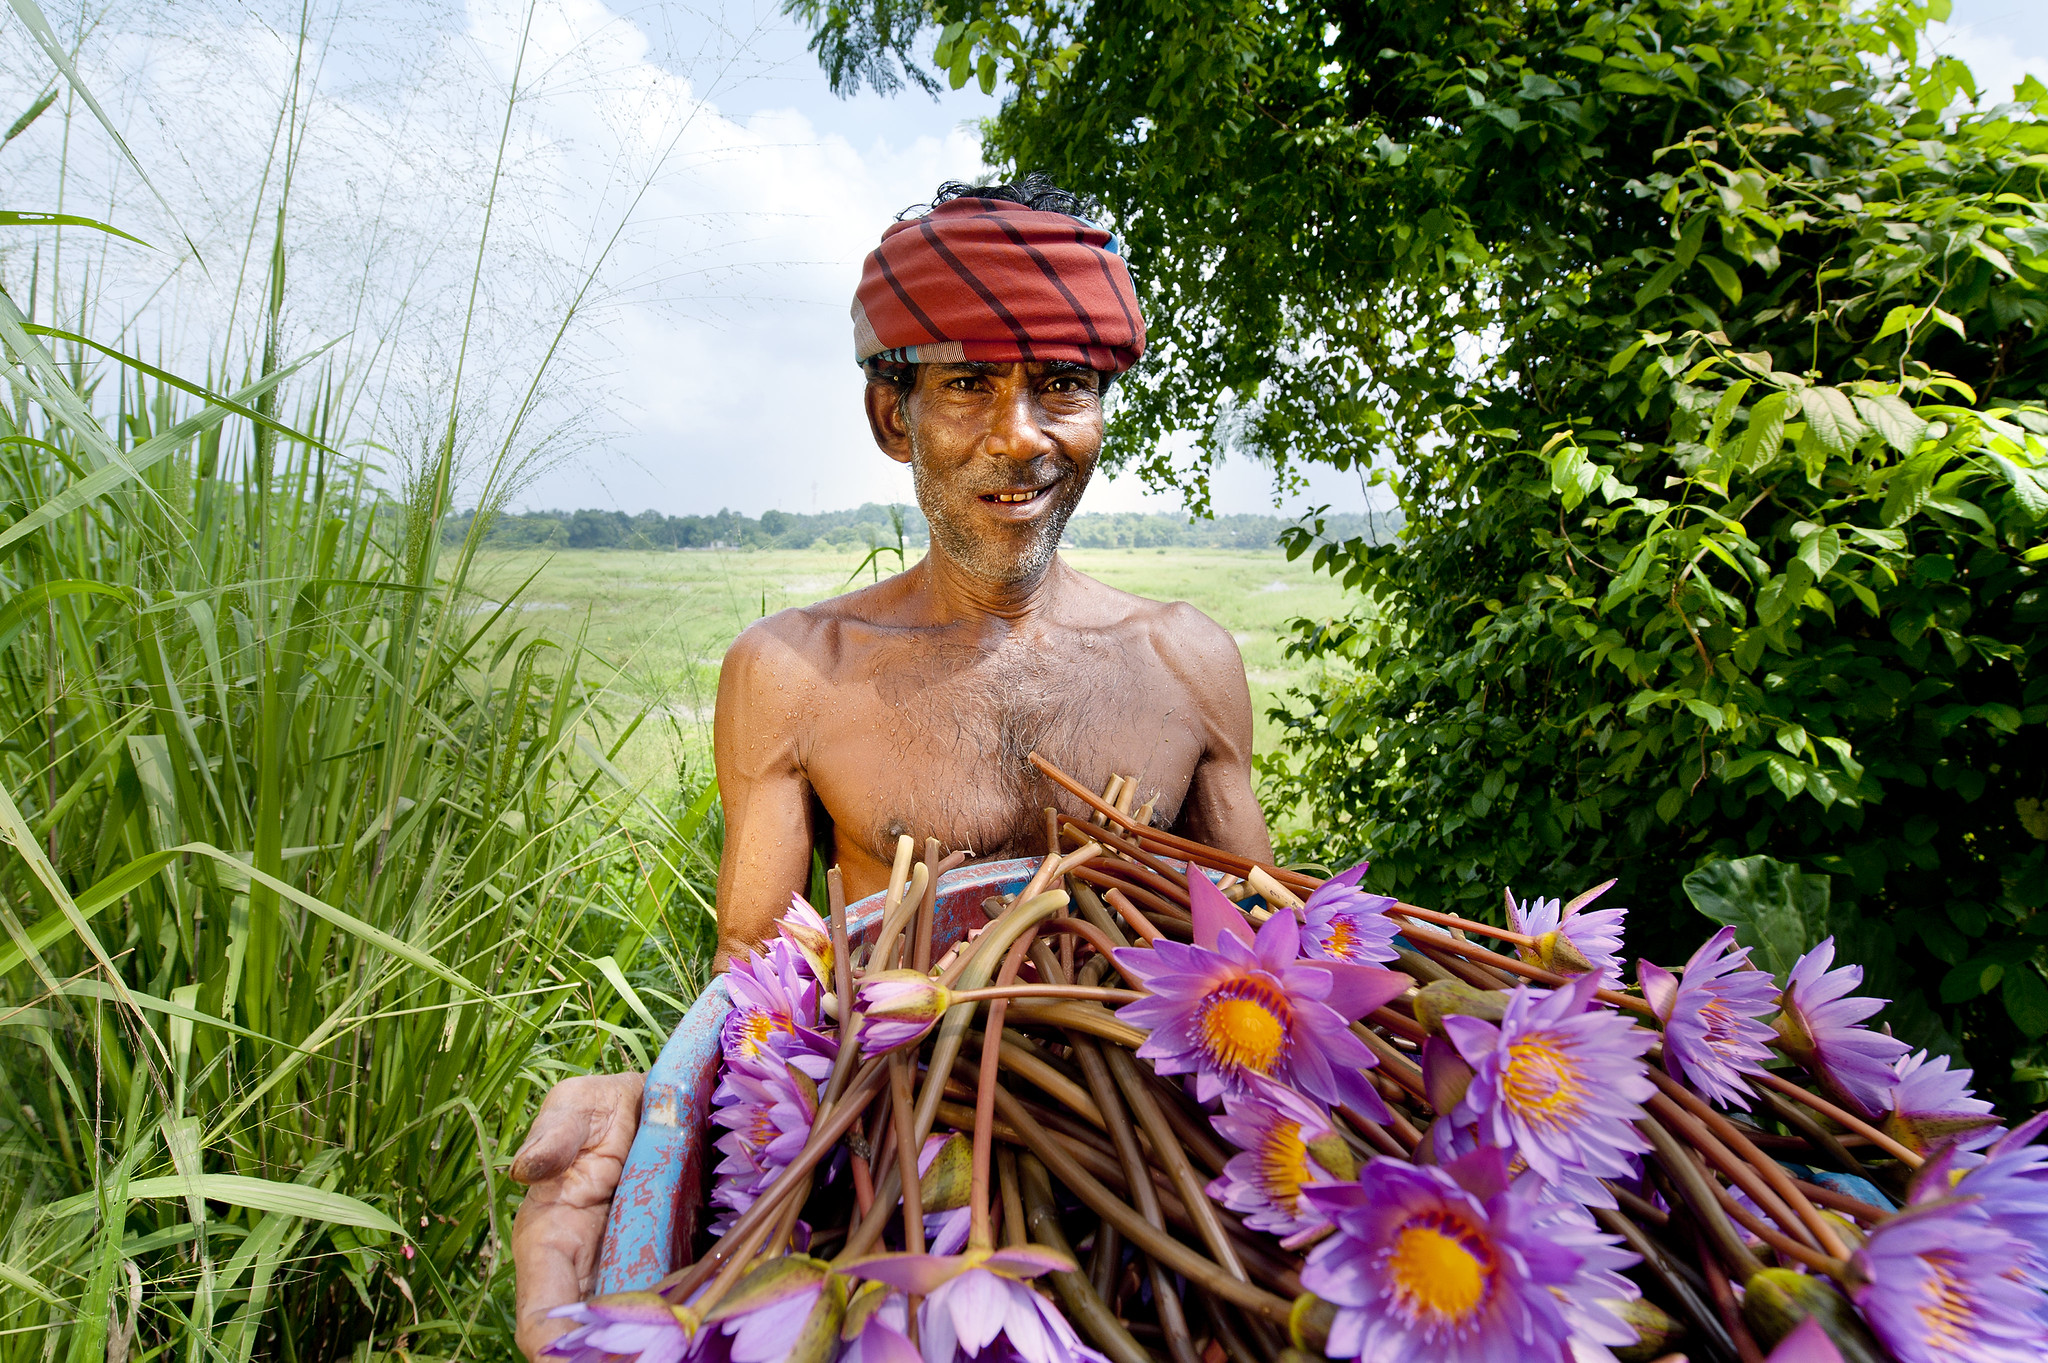 Man with lotus flowers plucked from neighboring wetlands for sale. Hamish John Appleby / IWMI.